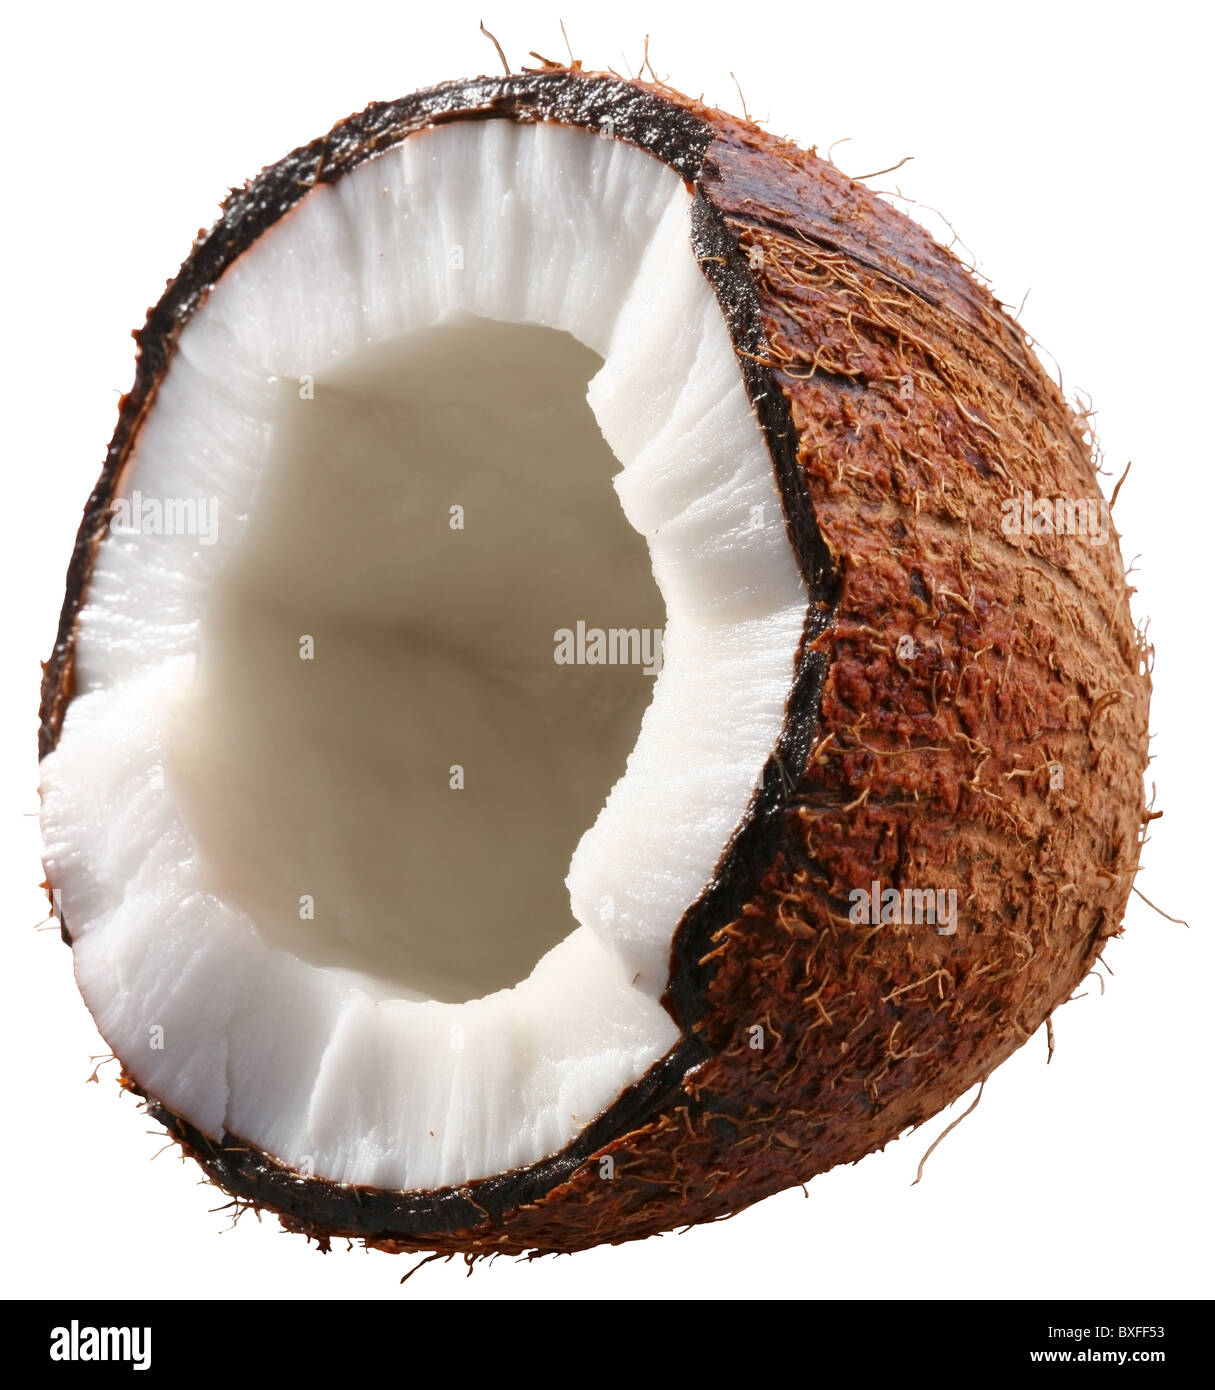 Half of the coconut is isolated on a white background. File contains a clipping paths. Stock Photo